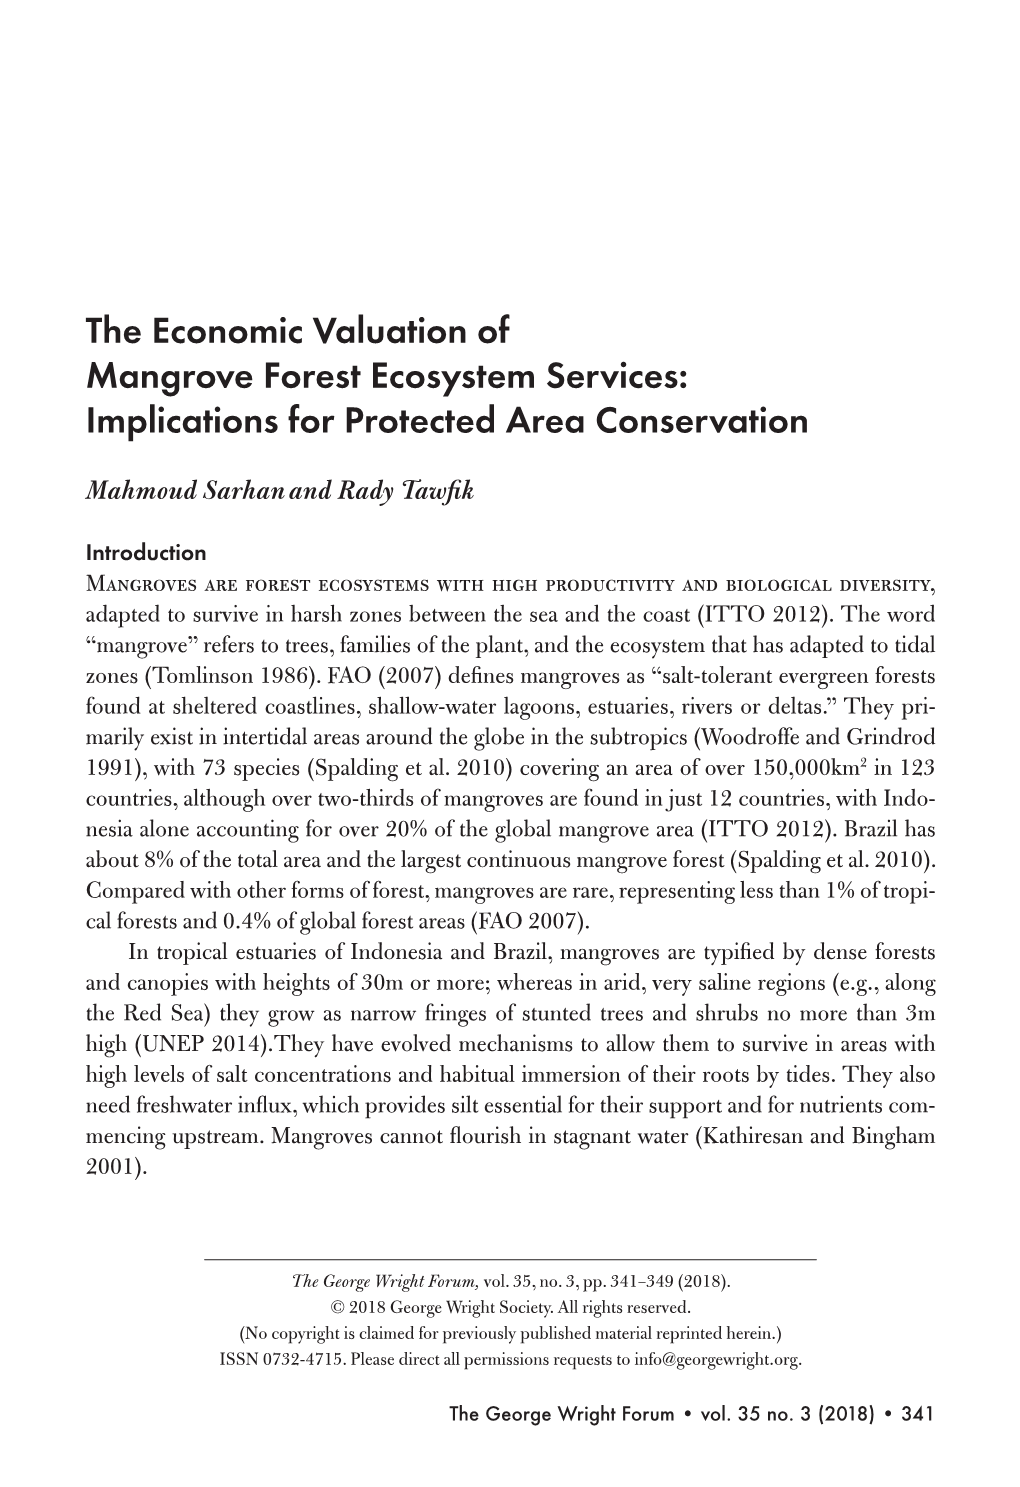 The Economic Valuation of Mangrove Forest Ecosystem Services: Implications for Protected Area Conservation